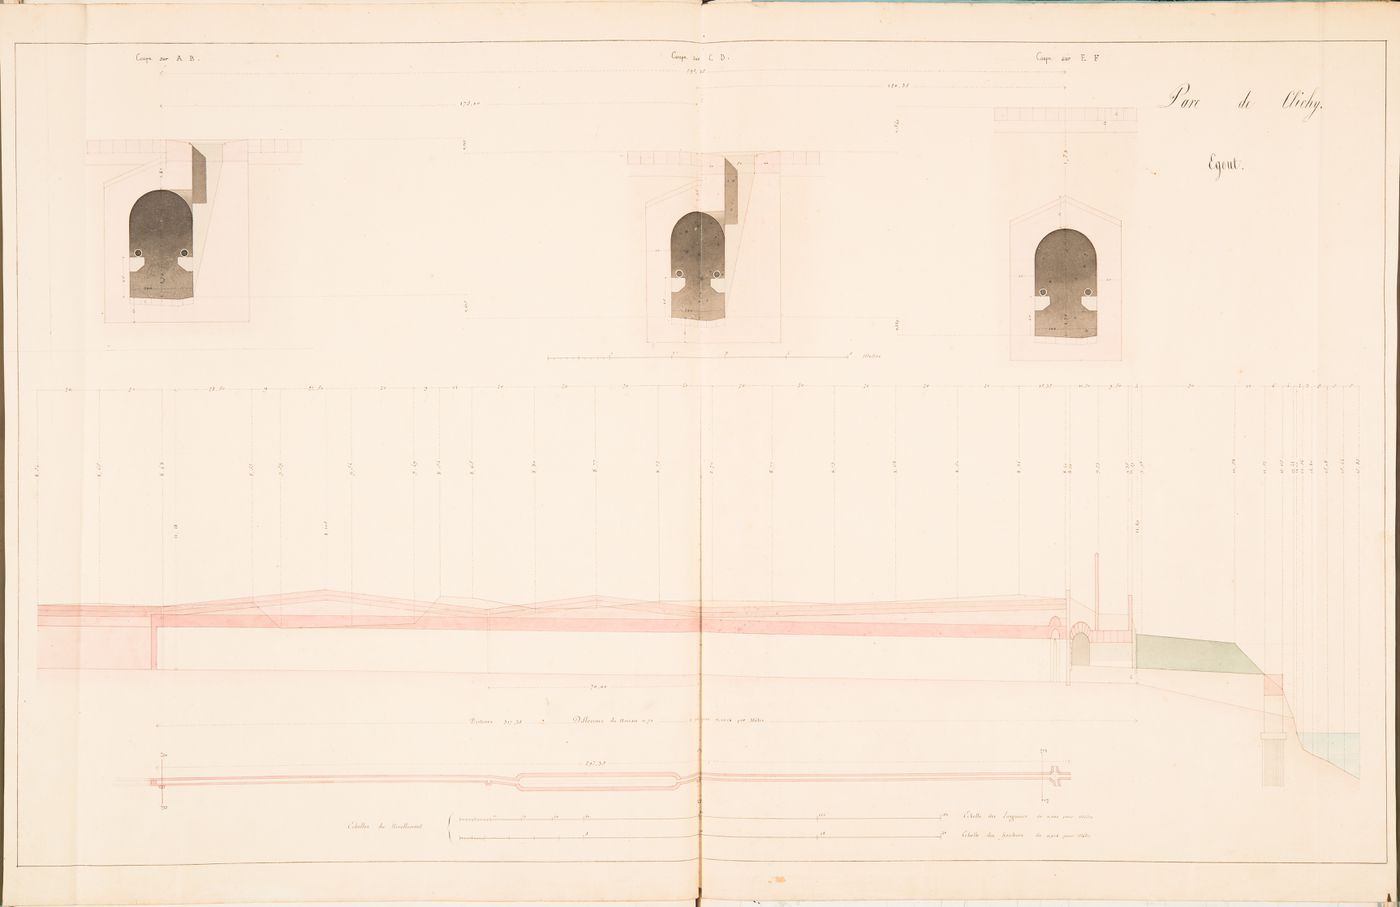 Longitudinal section and cross sections for a sewer, Parc de Clichy